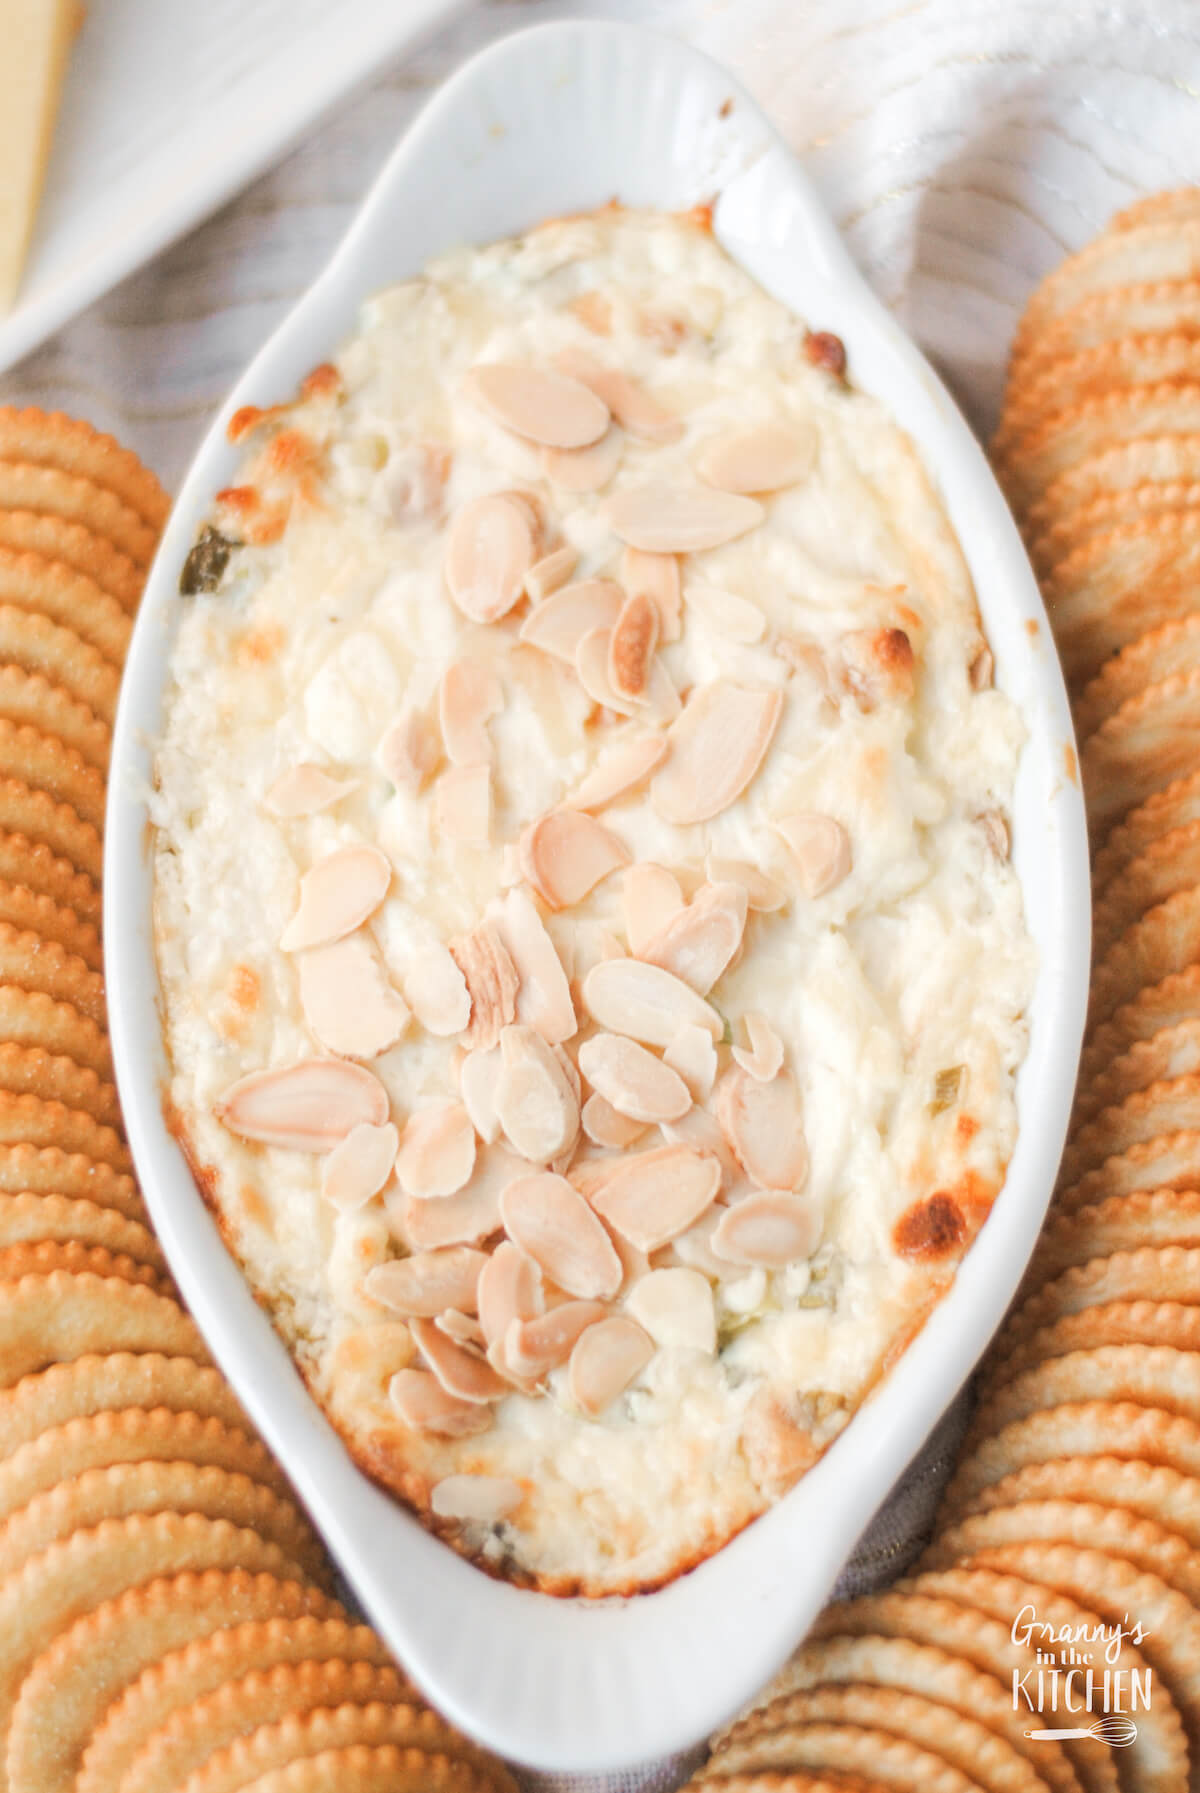 baking dish with Swiss almond dip surrounded by Ritz crackers.